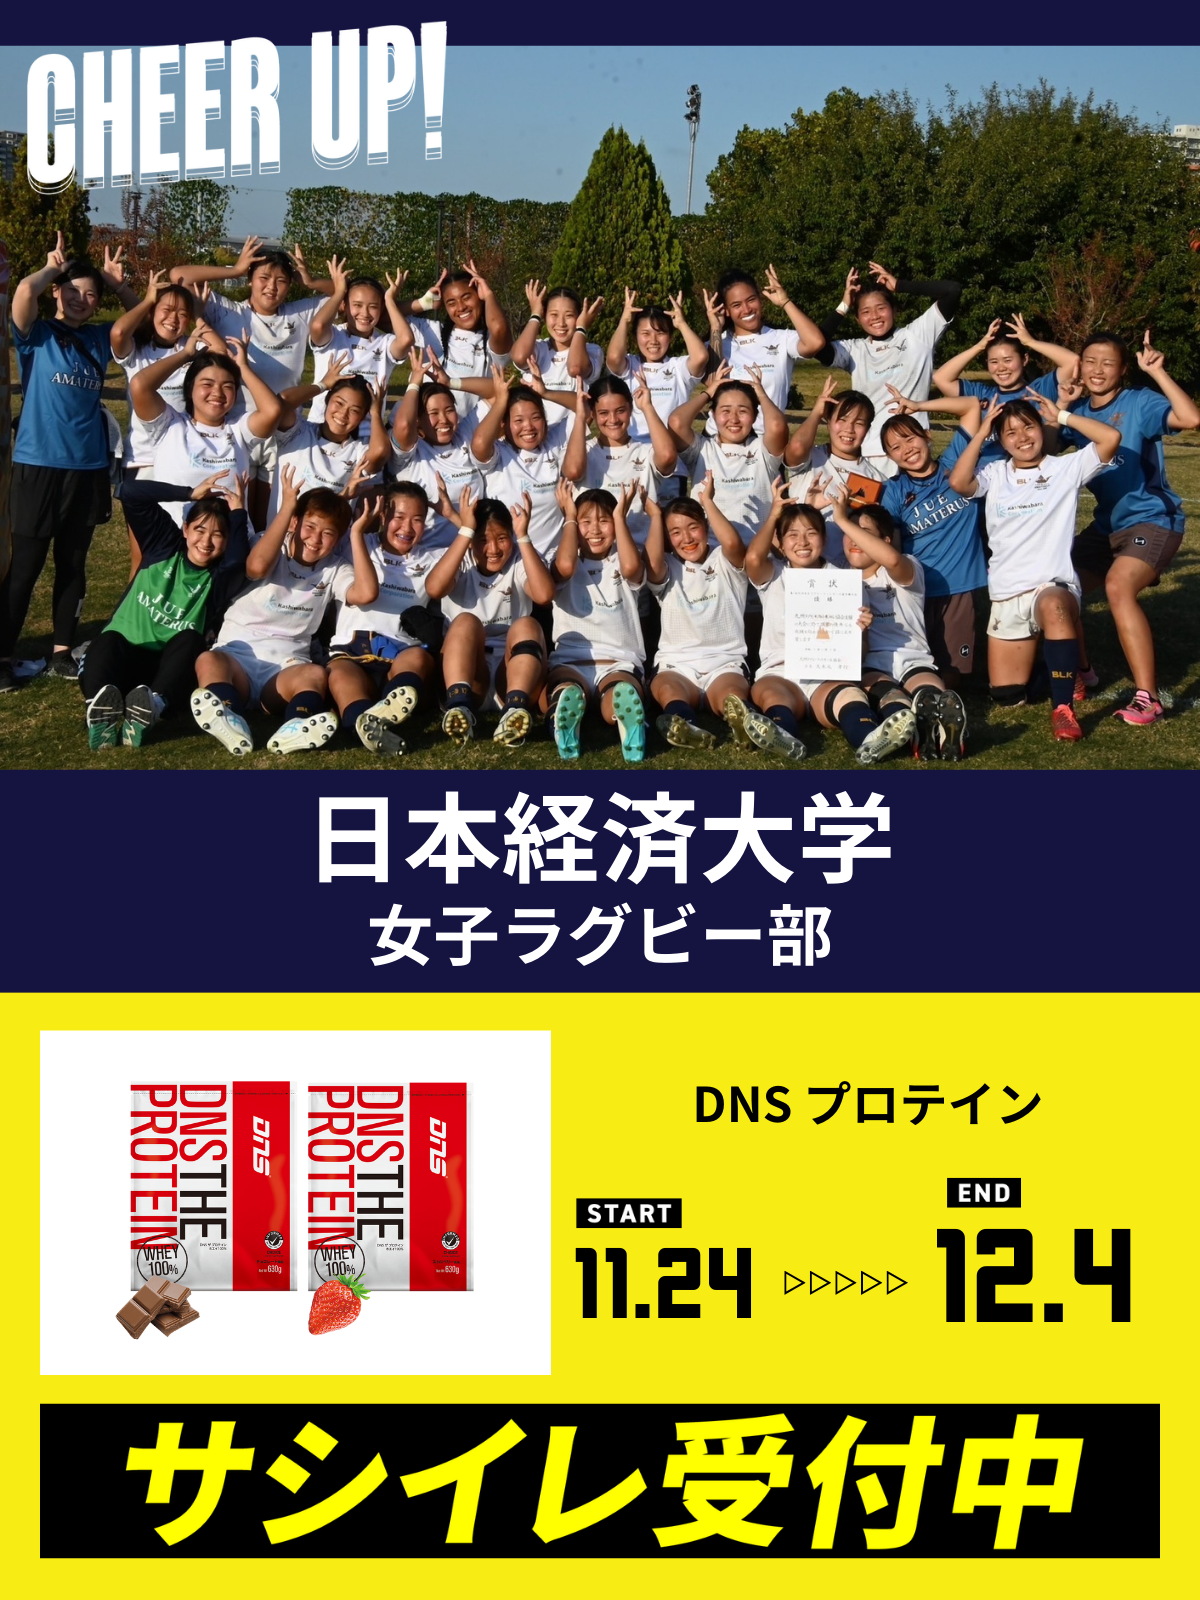 CHEER UP! for 日本経済大学　女子ラグビー部